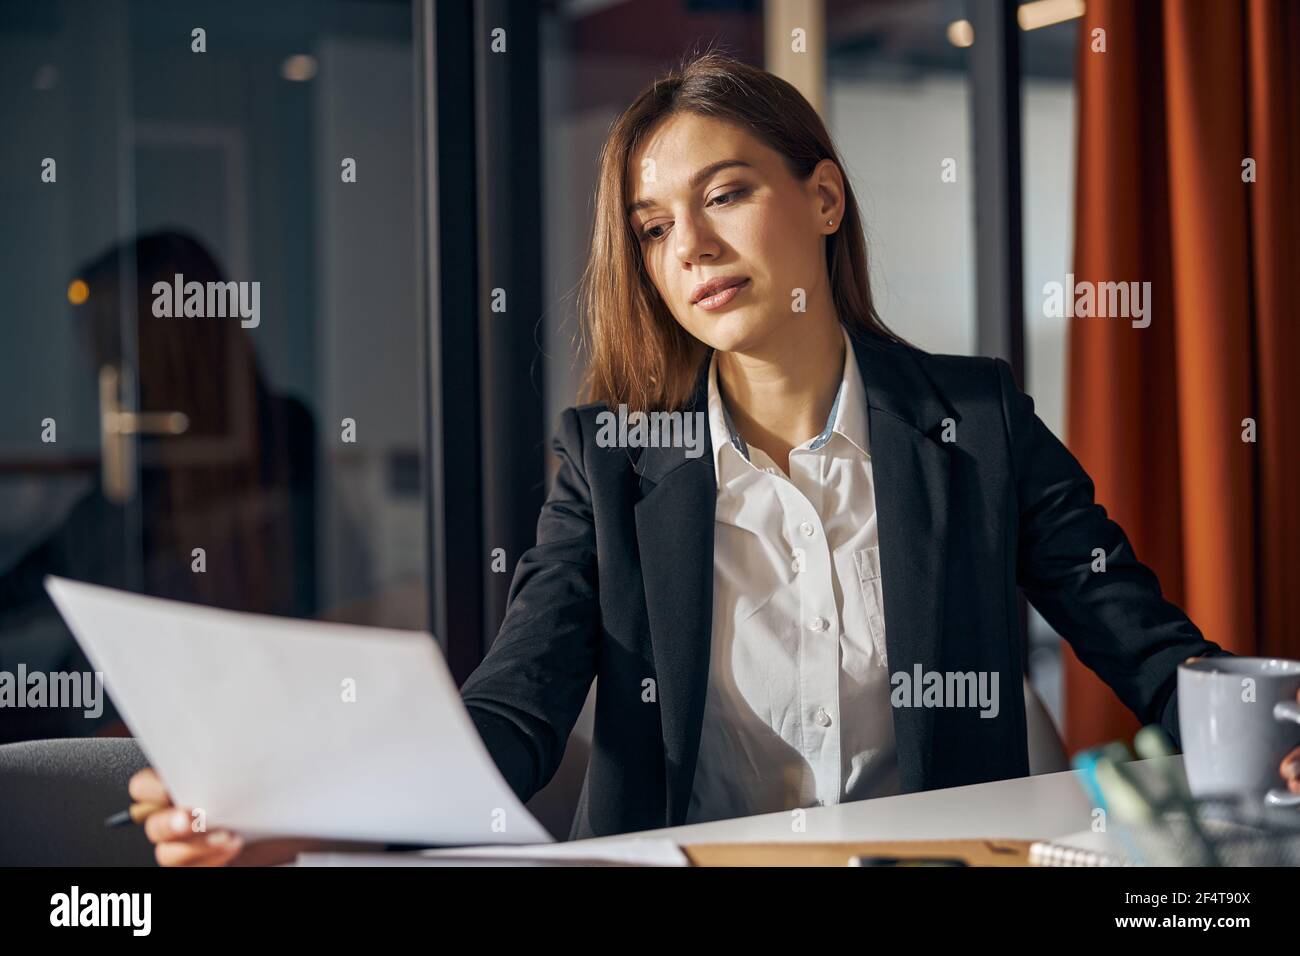 Focused young draftswoman scrutinizing a technical drawing Stock Photo